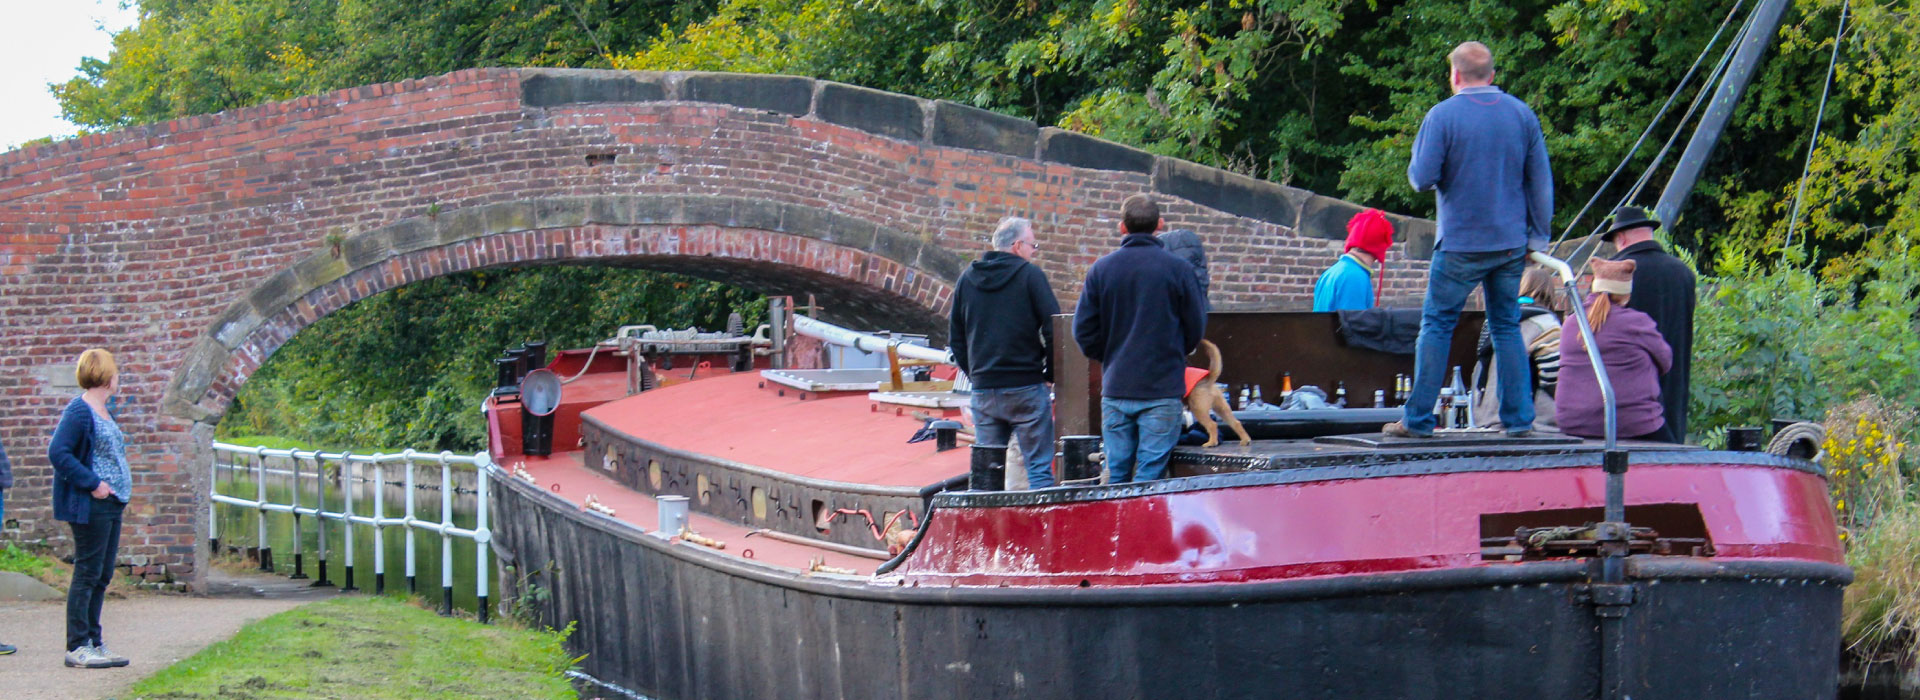 Interesting places to visit on or near the Bridgewater Canal